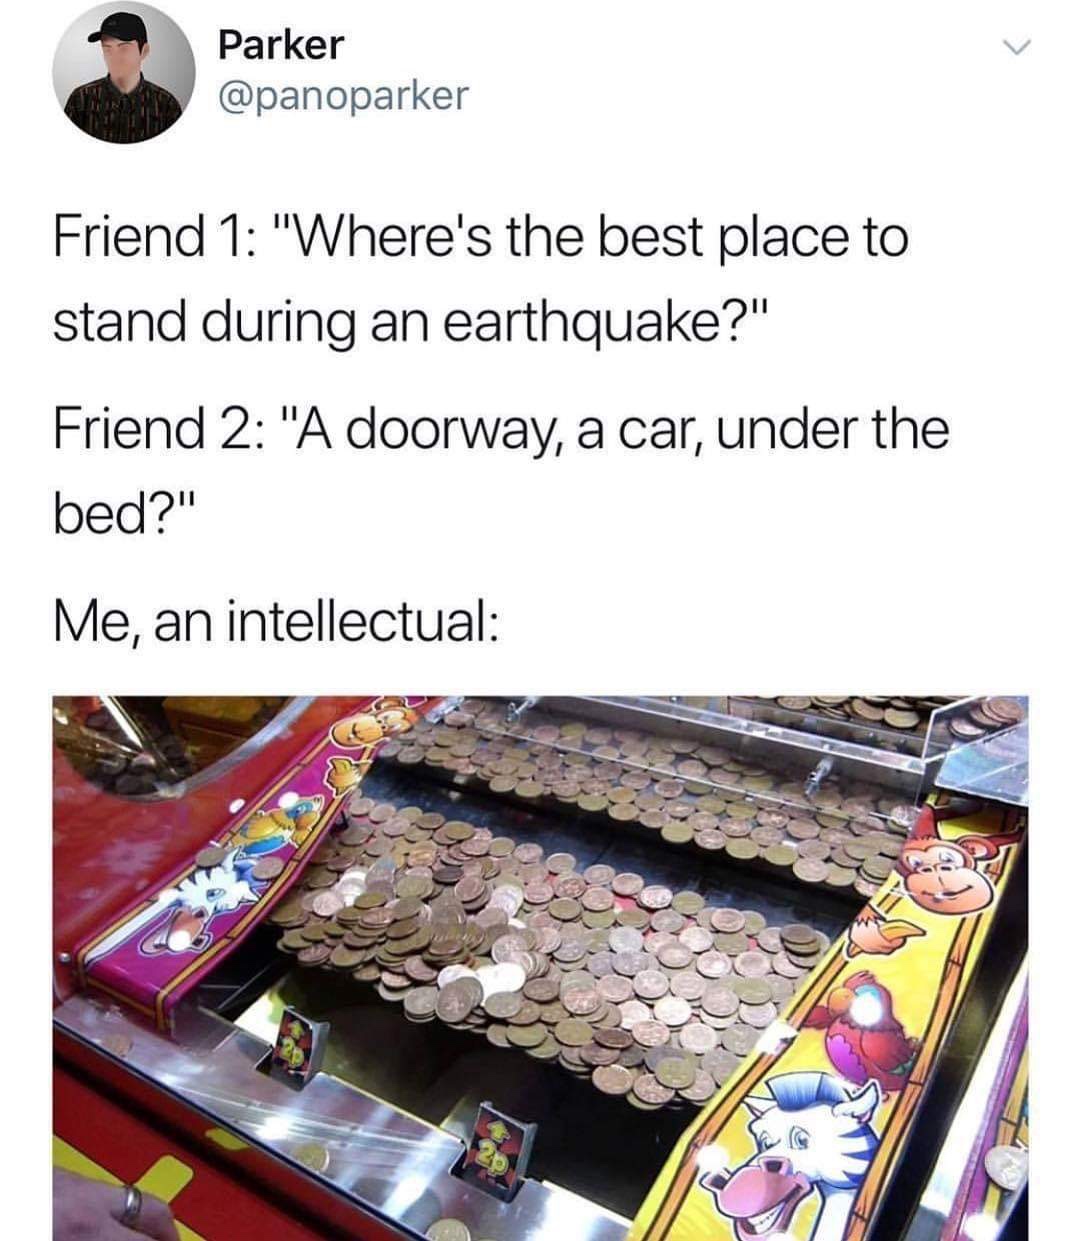 me an intellectual memes - Parker Friend 1 "Where's the best place to stand during an earthquake?" Friend 2 "A doorway, a car, under the bed?" Me, an intellectual